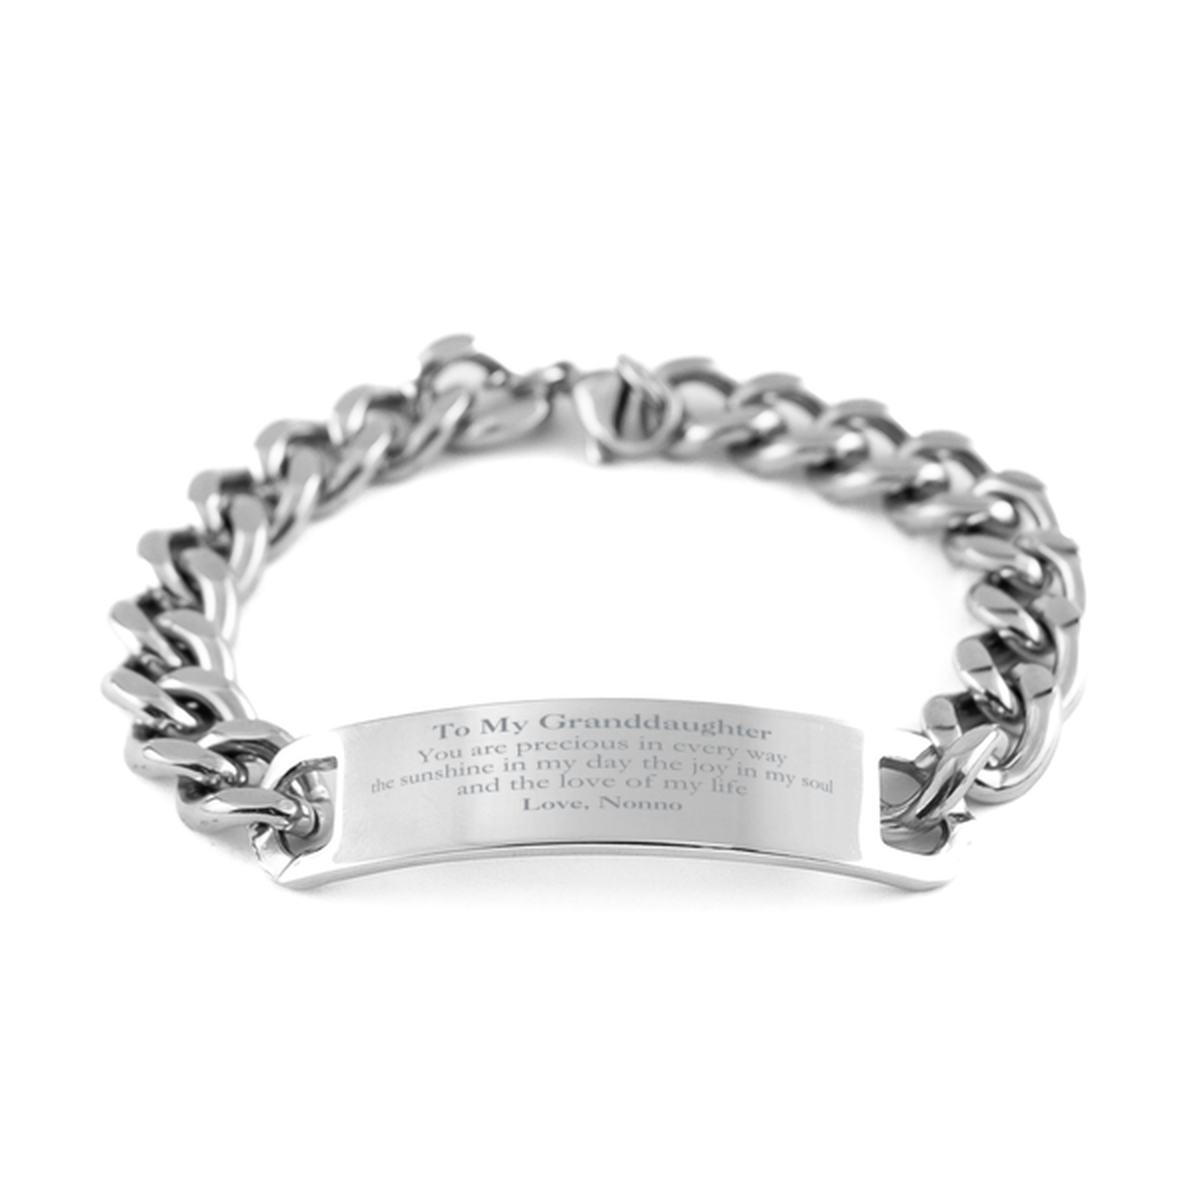 Graduation Gifts for Granddaughter Cuban Chain Stainless Steel Bracelet Present from Nonno, Christmas Granddaughter Birthday Gifts Granddaughter You are precious in every way the sunshine in my day. Love, Nonno